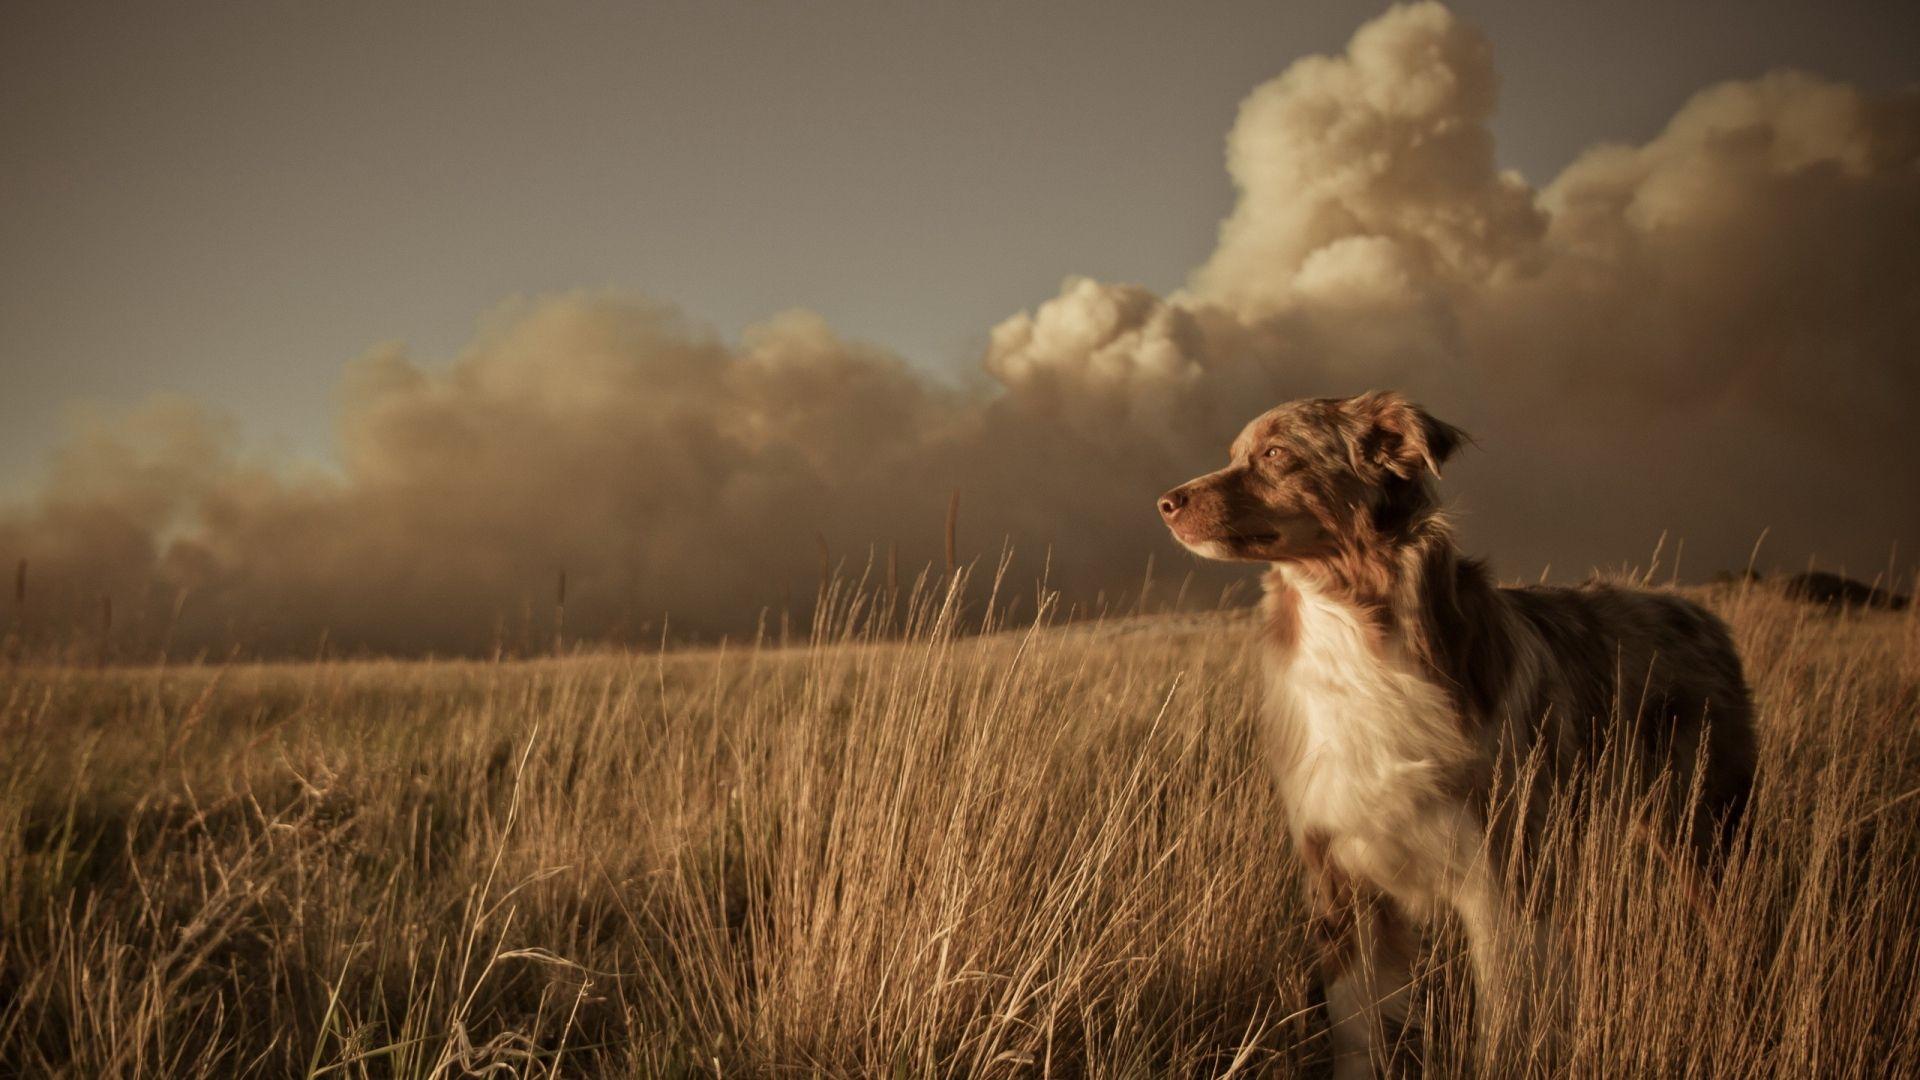 Lonely dog in the windy field with clouds wallpaper download